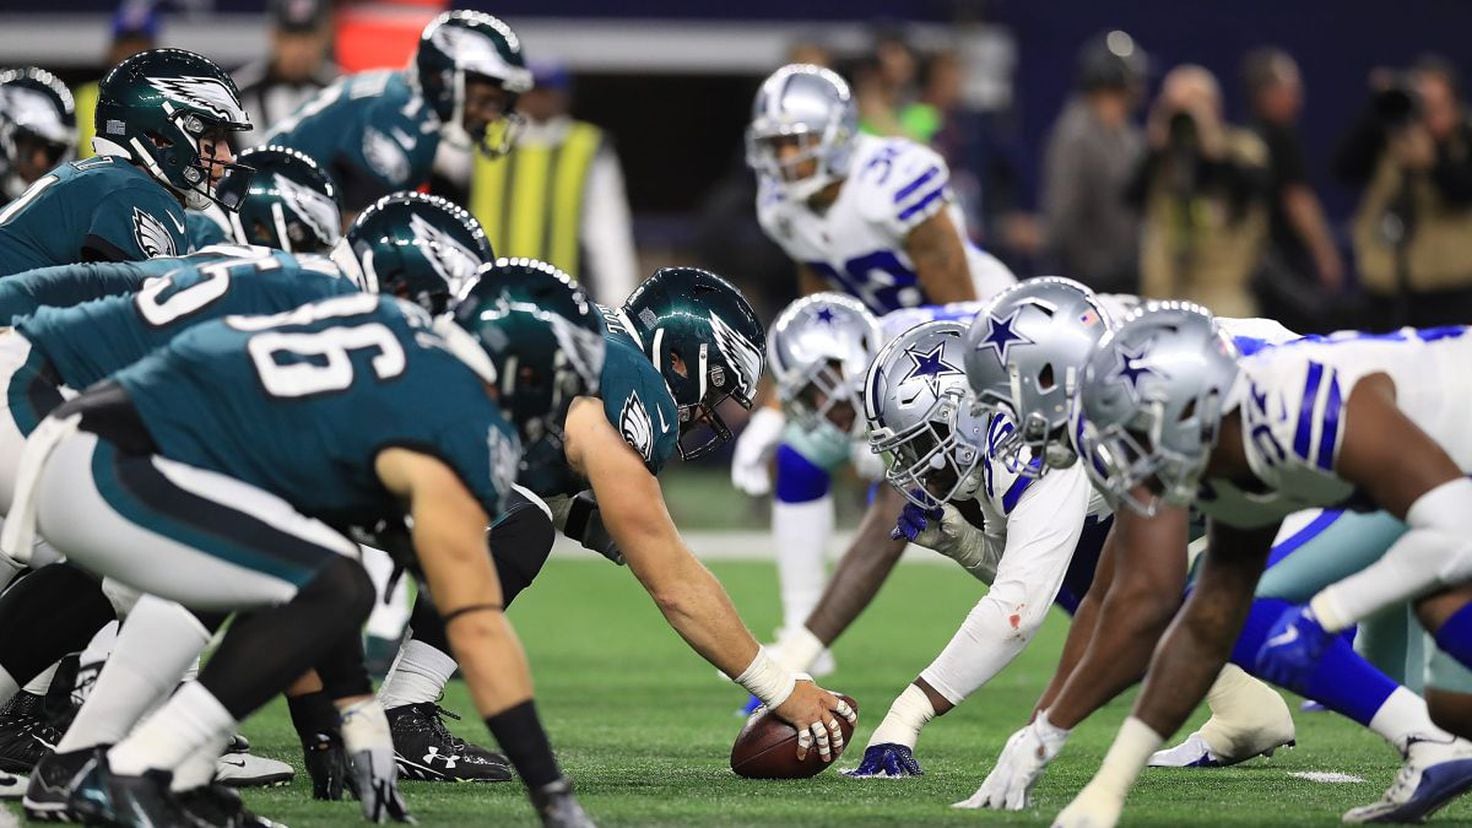 Eagles vs Cowboys Odds and predictions for NFL Christmas Eve football